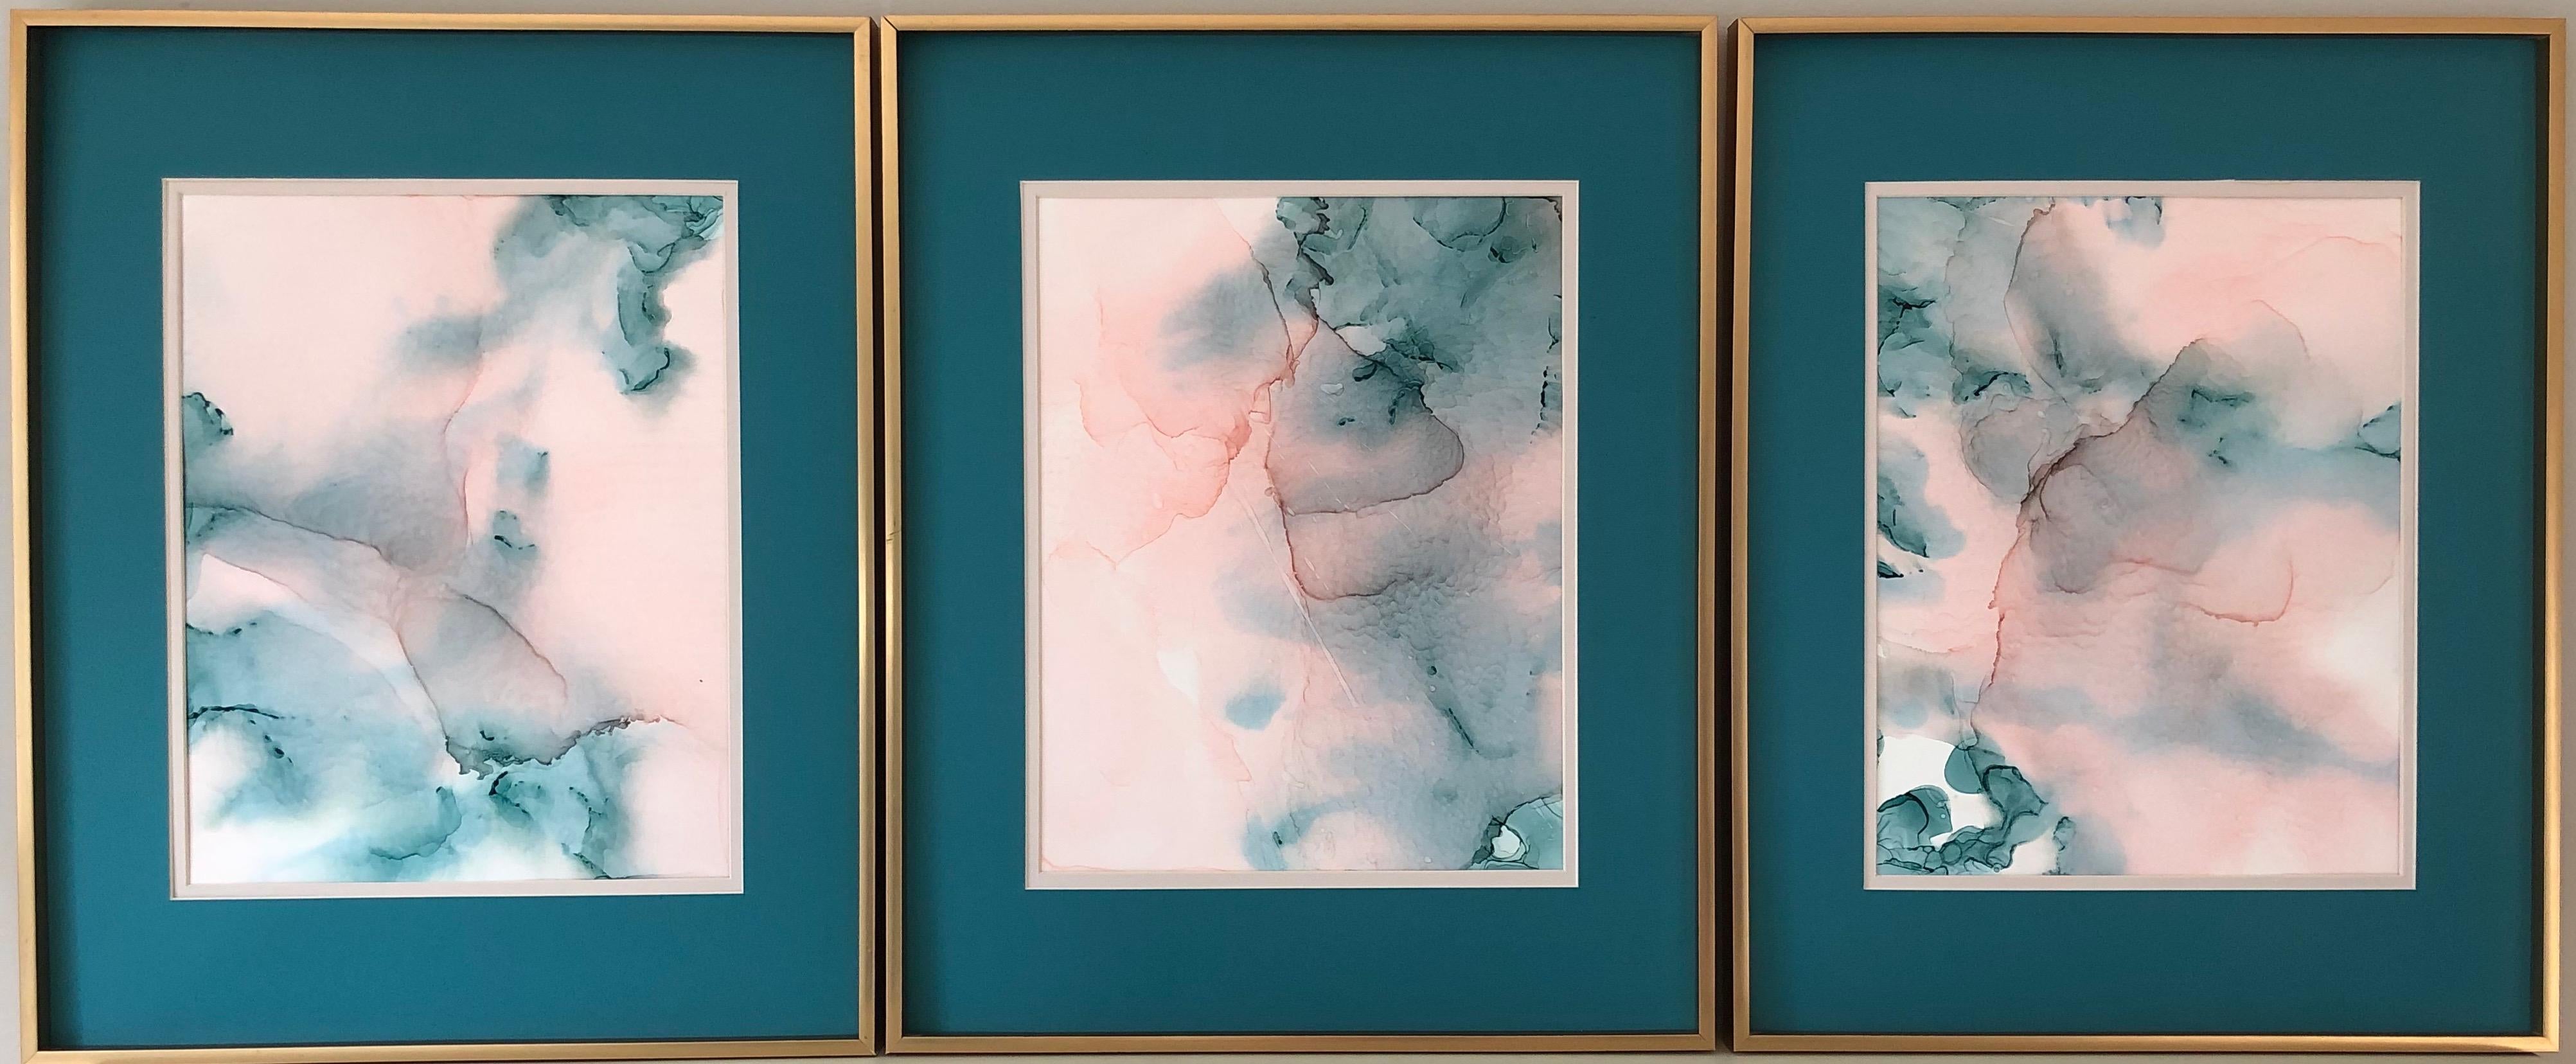 Cote D'Azur- abstraction art, made in pale pink, turquoise color